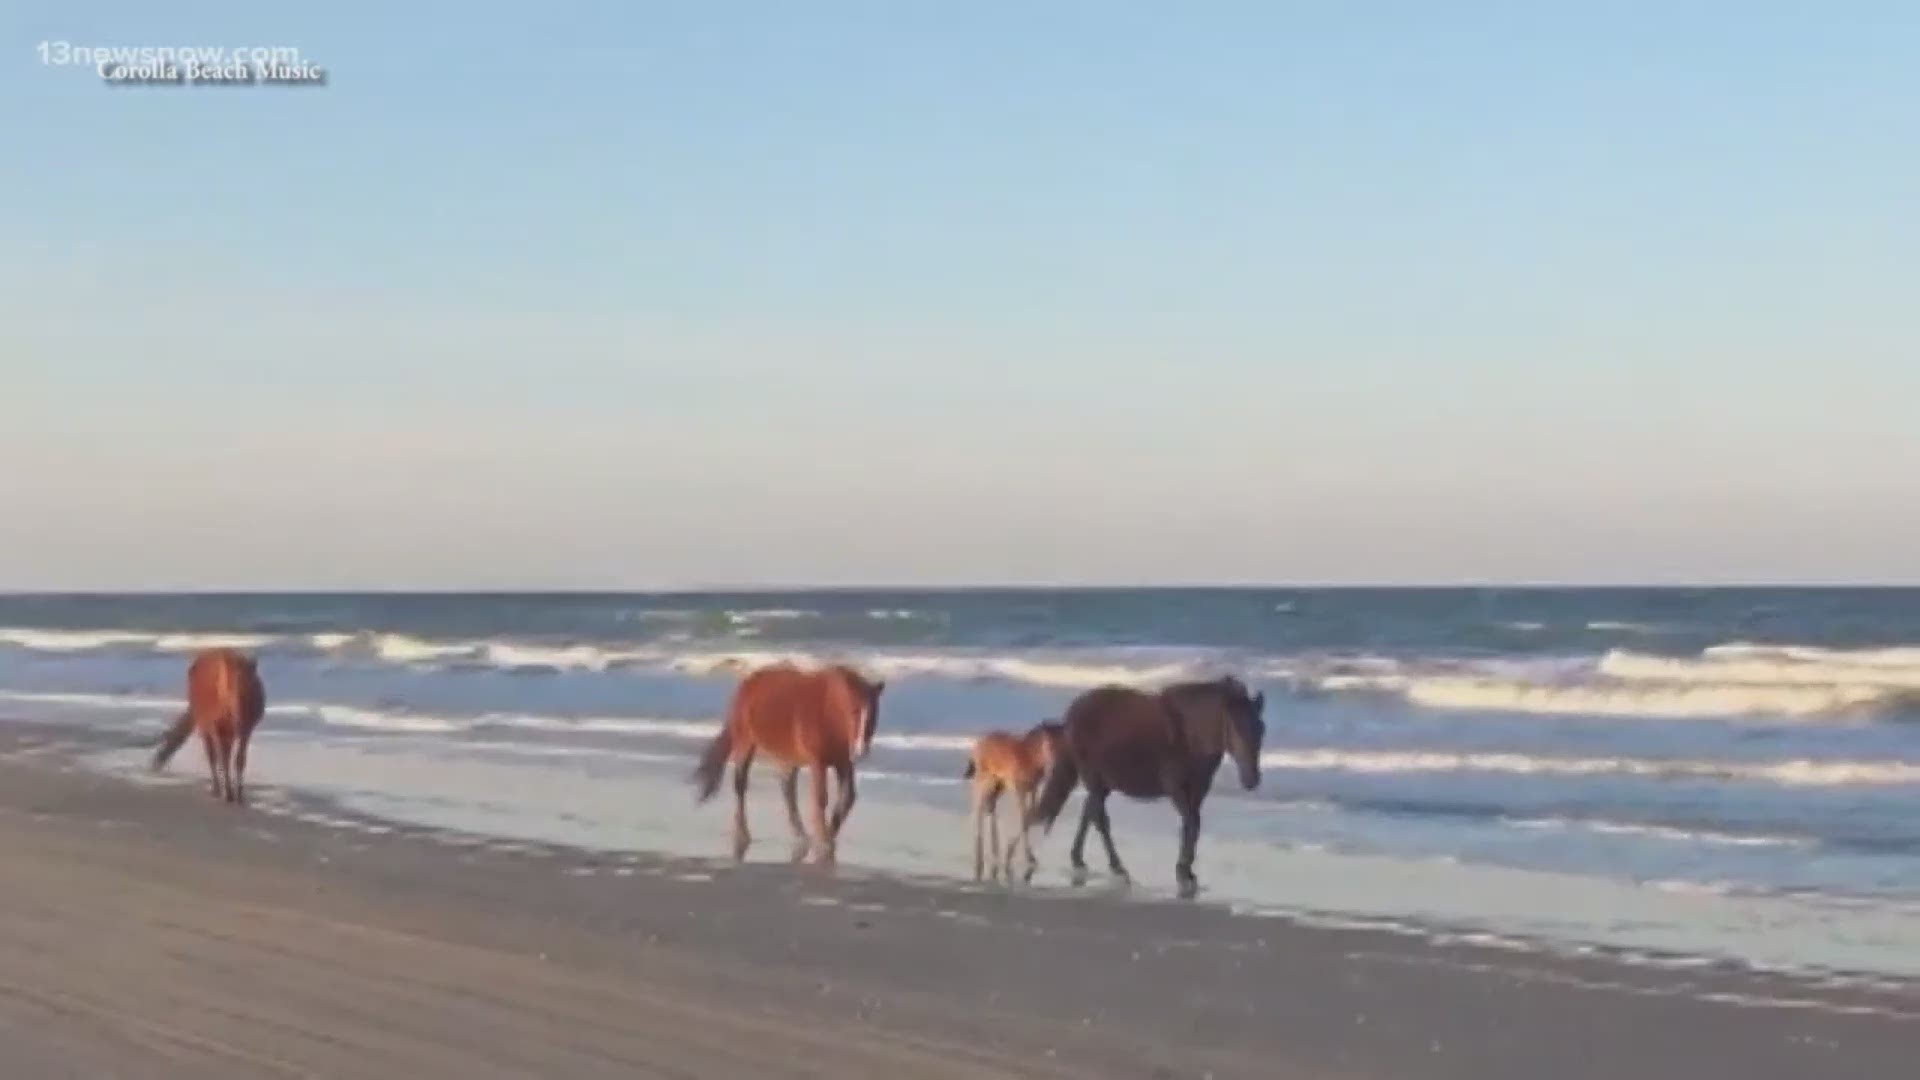 Video from Corolla Beach Music shows a foal walking along the beach in the Outer Banks. It's believed to be the first one of the 2019 season.